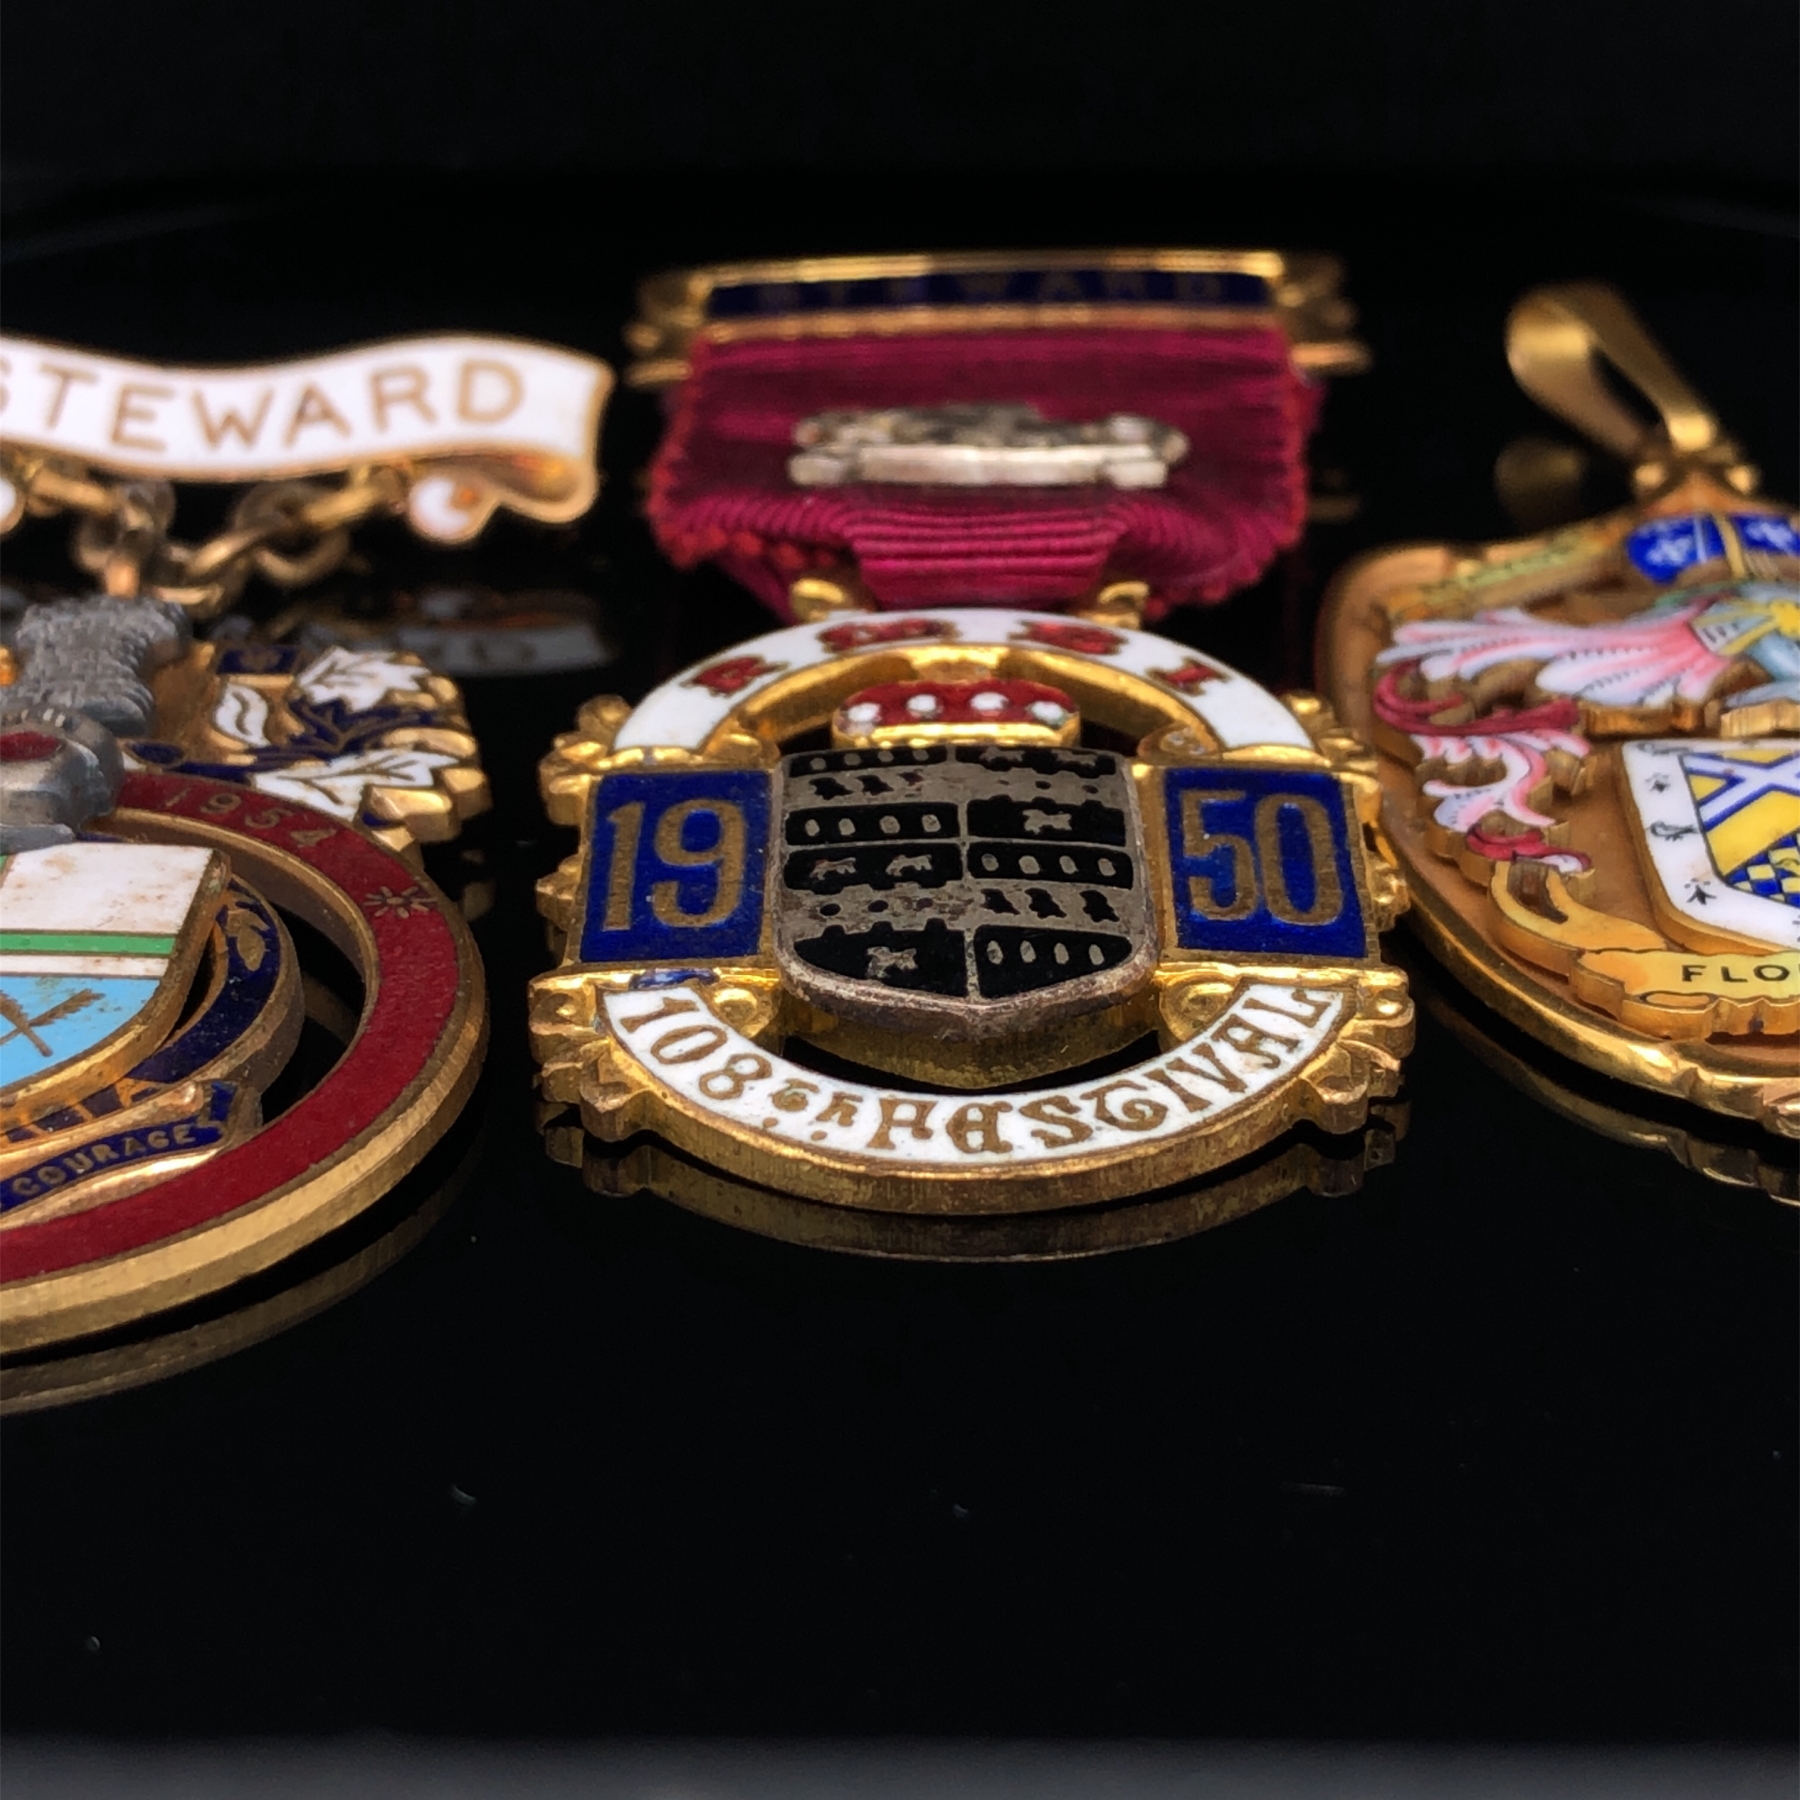 A HALLMARKED 9ct GOLD AND ENAMEL MAYORS MEDALLION, ENGRAVED WITH ENAMEL BANNERS 1951-54, AND FLOREAT